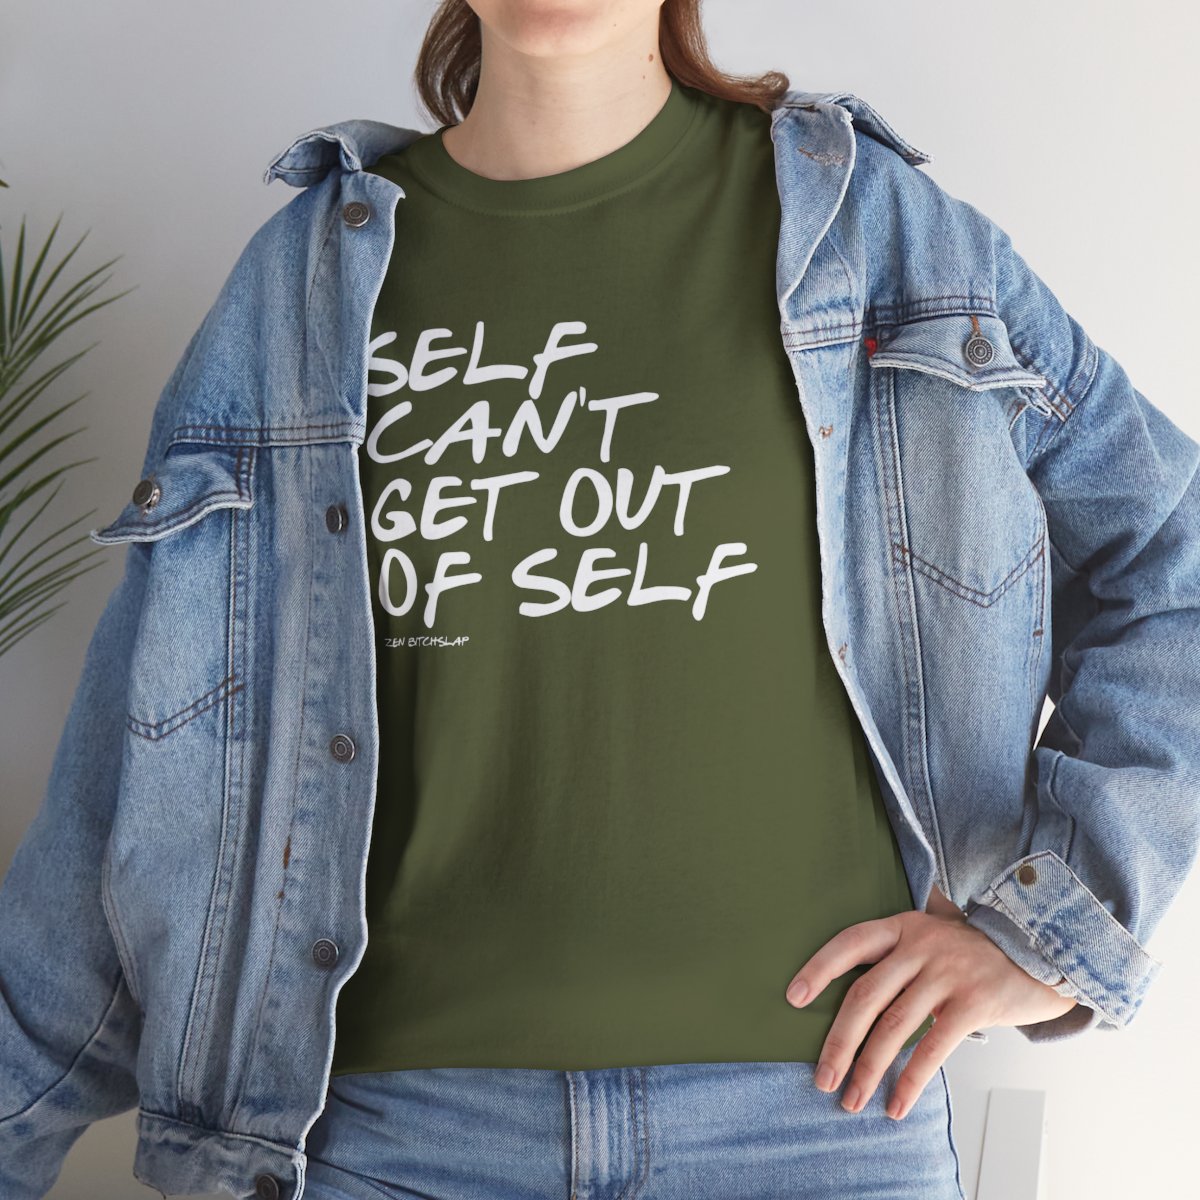 Self Can't... Unisex Heavy Cotton Tee : White Ink product thumbnail image